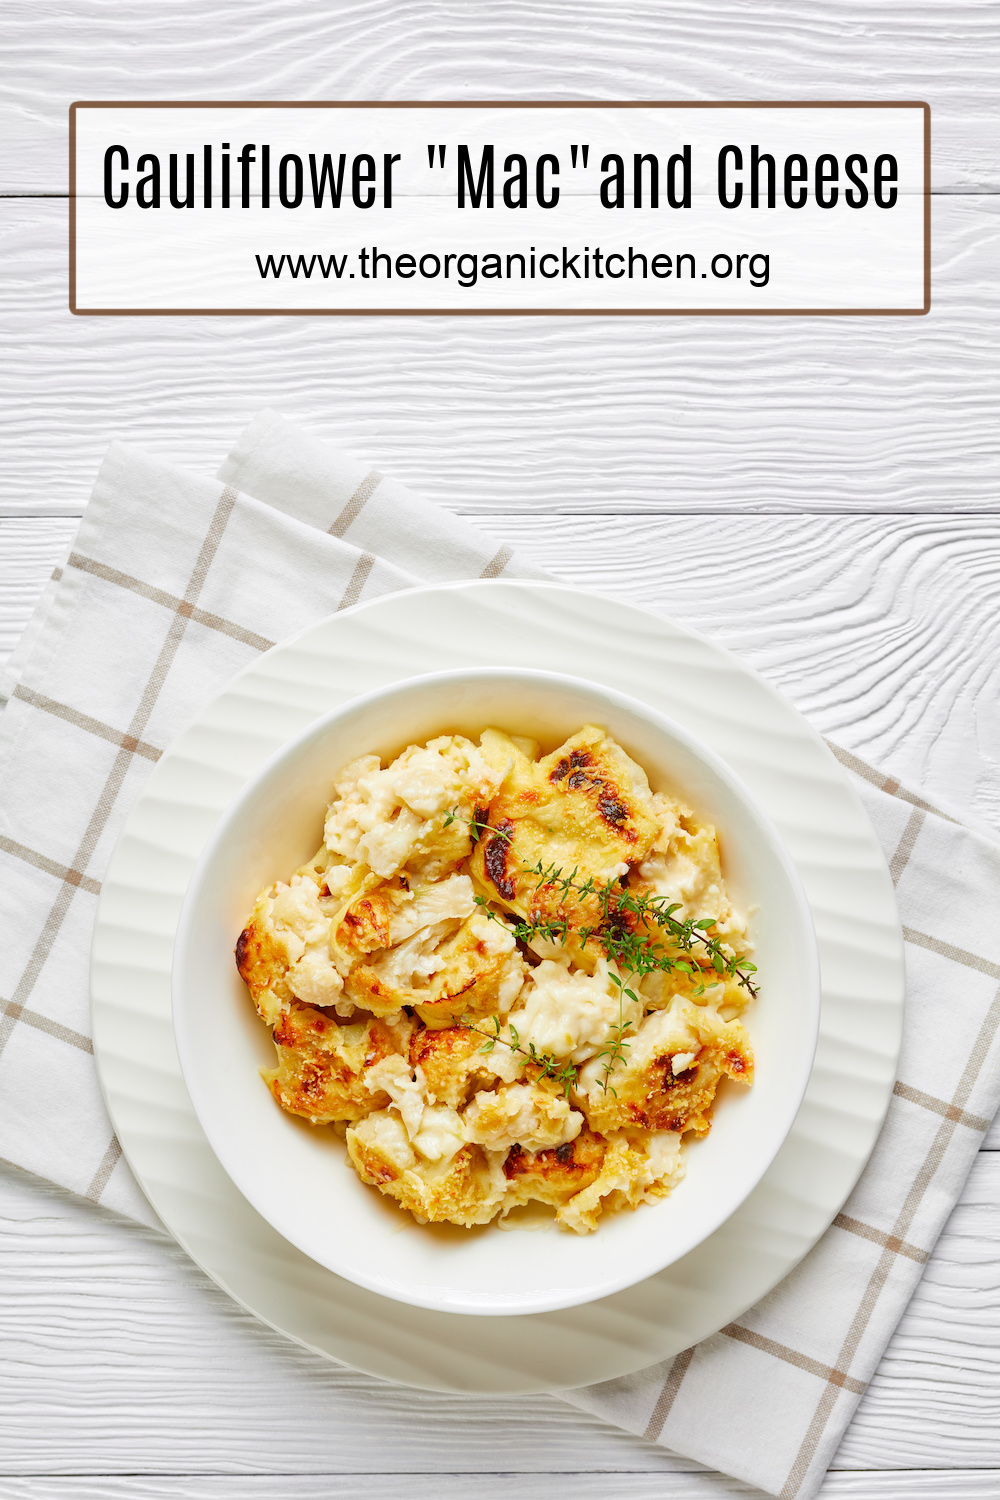 Cauliflower "Mac" and Cheese on white plate set atop brown and white plaid dish towel